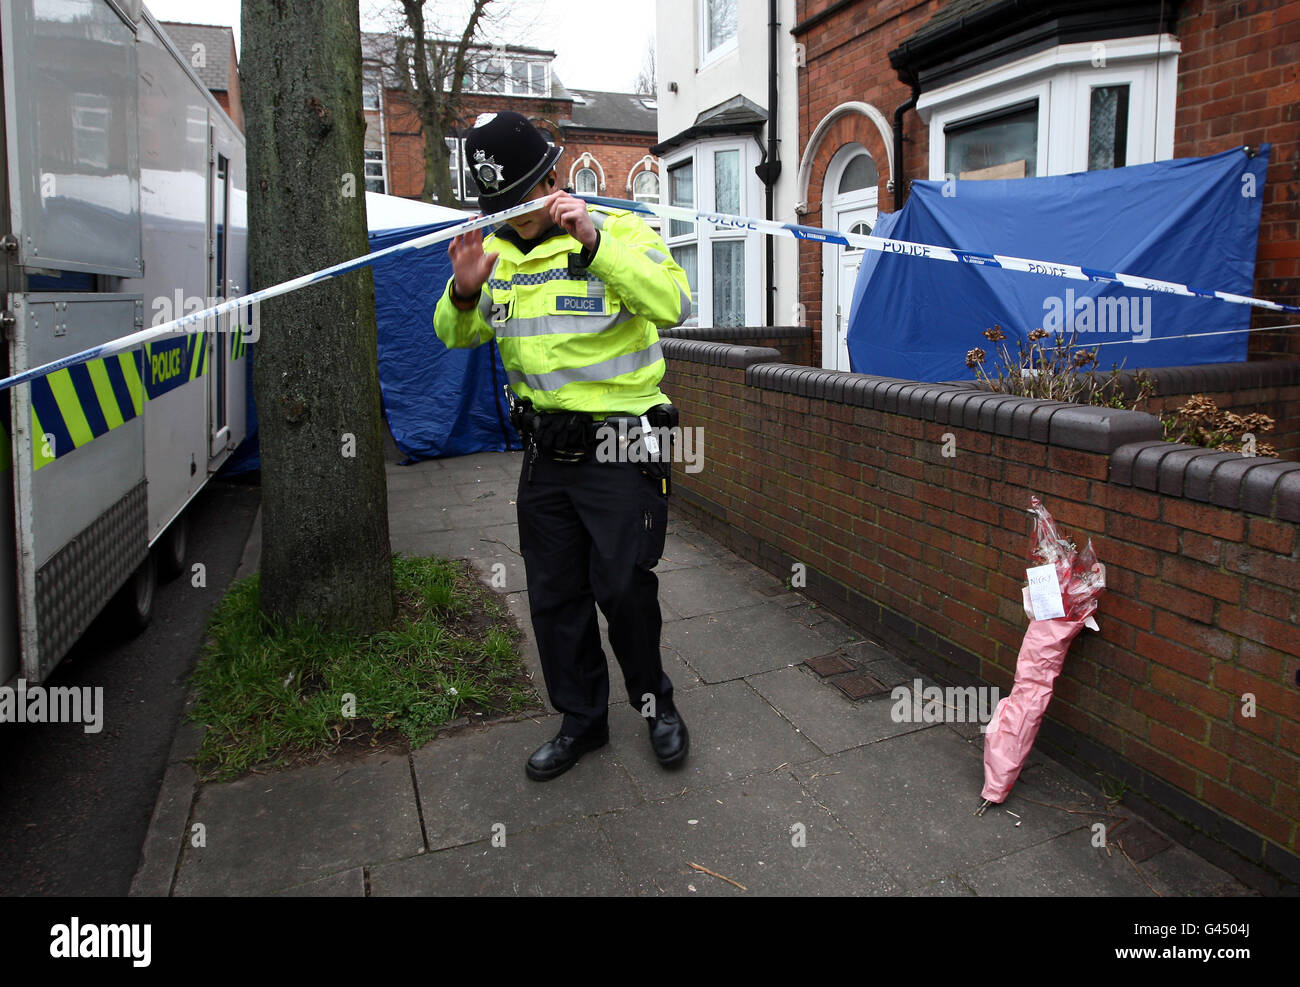 West Midlands Police at a house in Whateley Road, Handsworth, Birmingham, where the body of an 18-year-old woman has been discovered by police at a house where a man was due to be arrested on suspicion of fraud. PRESS ASSOCIATION Photo. Picture date: Thursday March 3, 2011. The teenager was found at around 11am yesterday. The woman's death is being treated as suspicious and two men, including a 20-year-old, have been arrested. Police could not confirm what the men had been arrested for. See PA story POLICE Teenager. Photo credit should read: David Jones/PA Wire Stock Photo